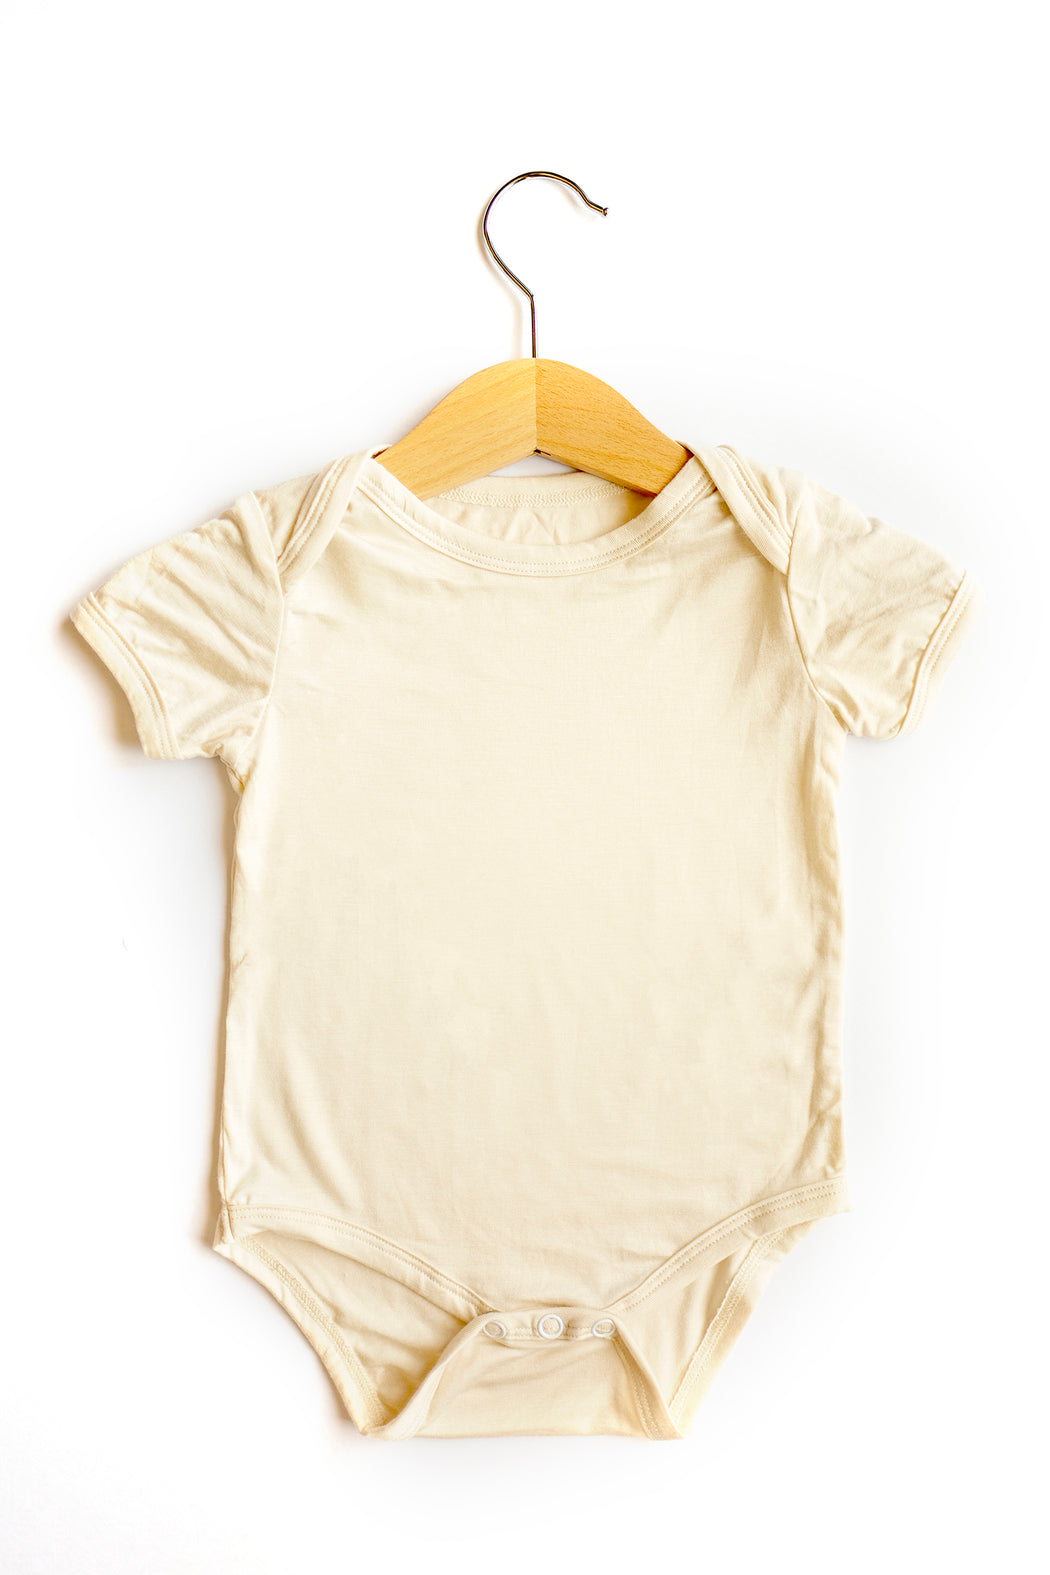 Ultra Cute Baby Bamboo Onesies - Biscuit